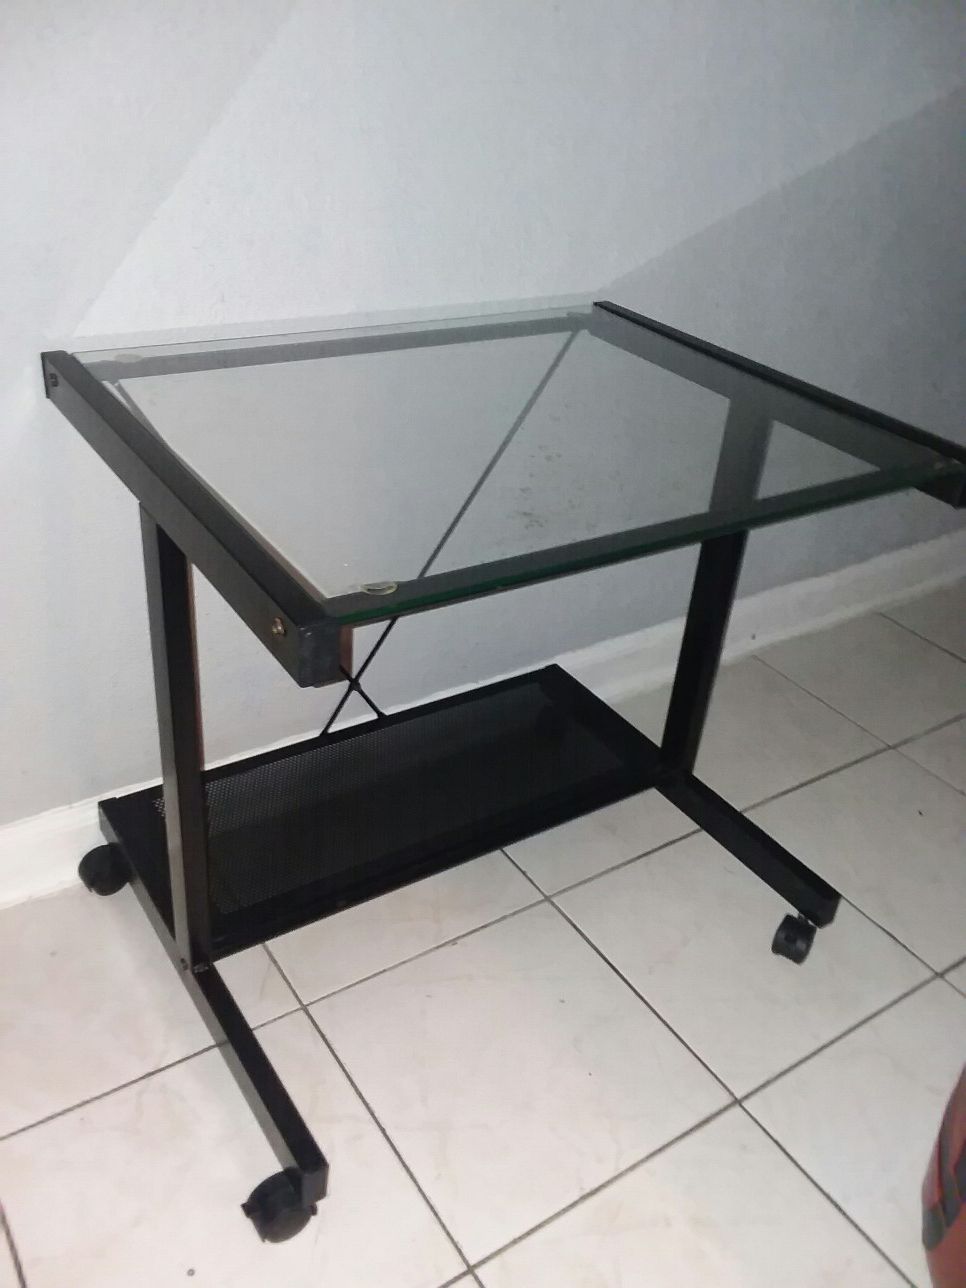 Glass office cart or children's desk with wheels $25 24 inches tall x 24 long x 20 wide